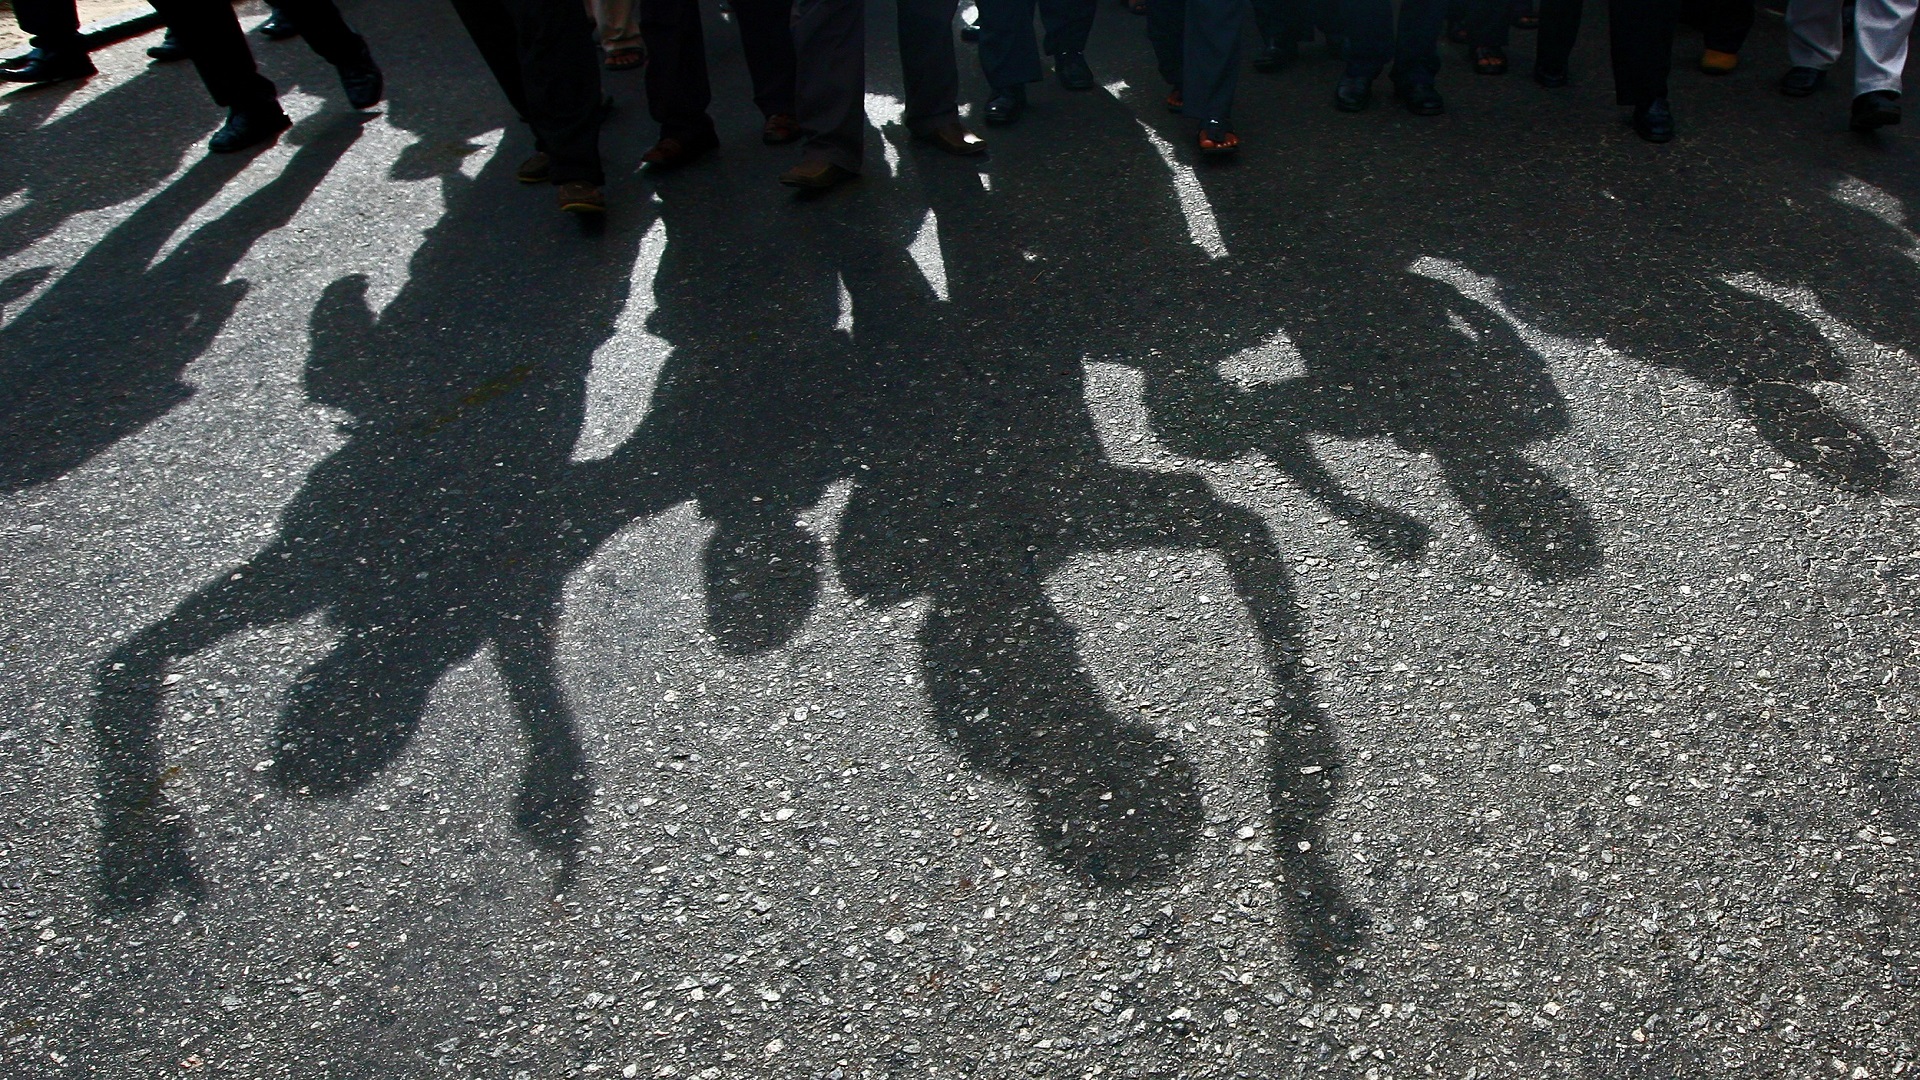 Shadows of people at a protest